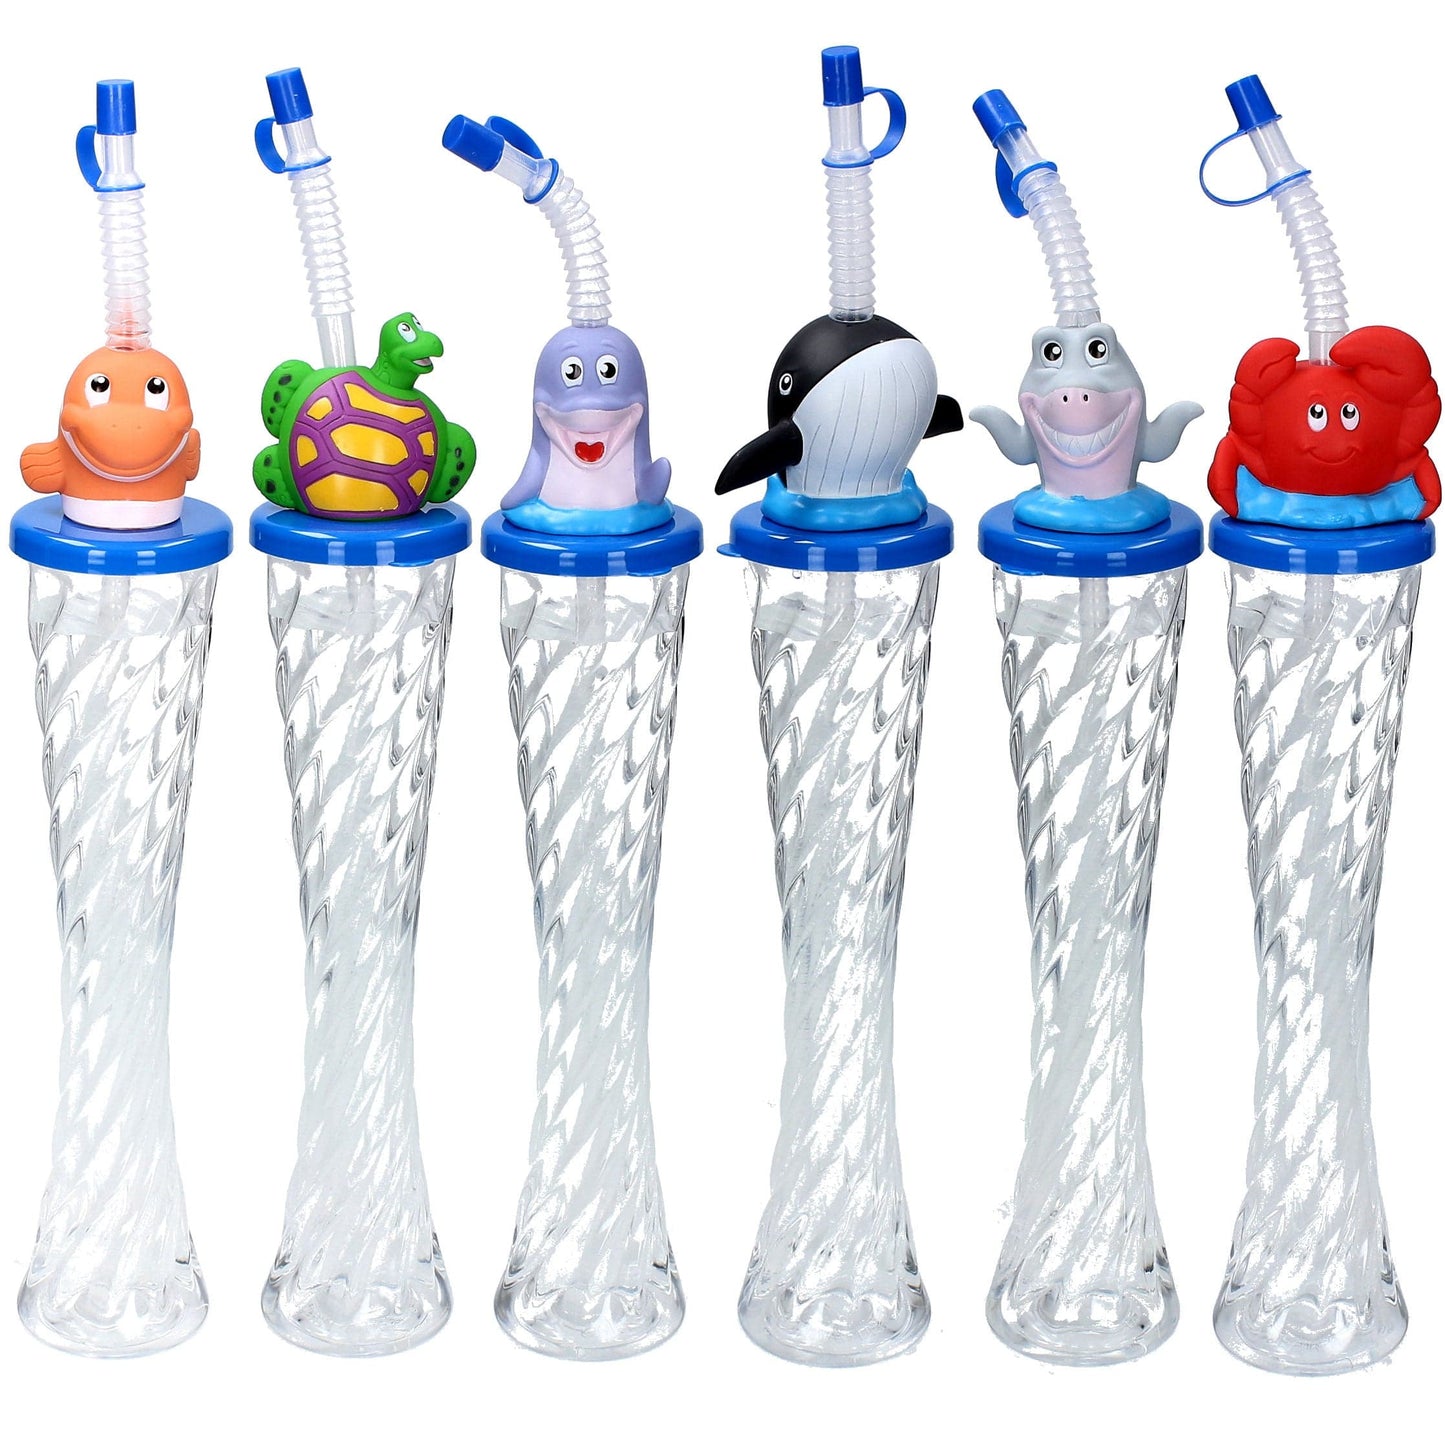 Sweet World USA Yard Cups SEA Animals Animals Twisty Cups (54 Cups) - for Cold or Frozen Drinks, Kids Parties - 12 oz. (350 ml) cups with lids and straws